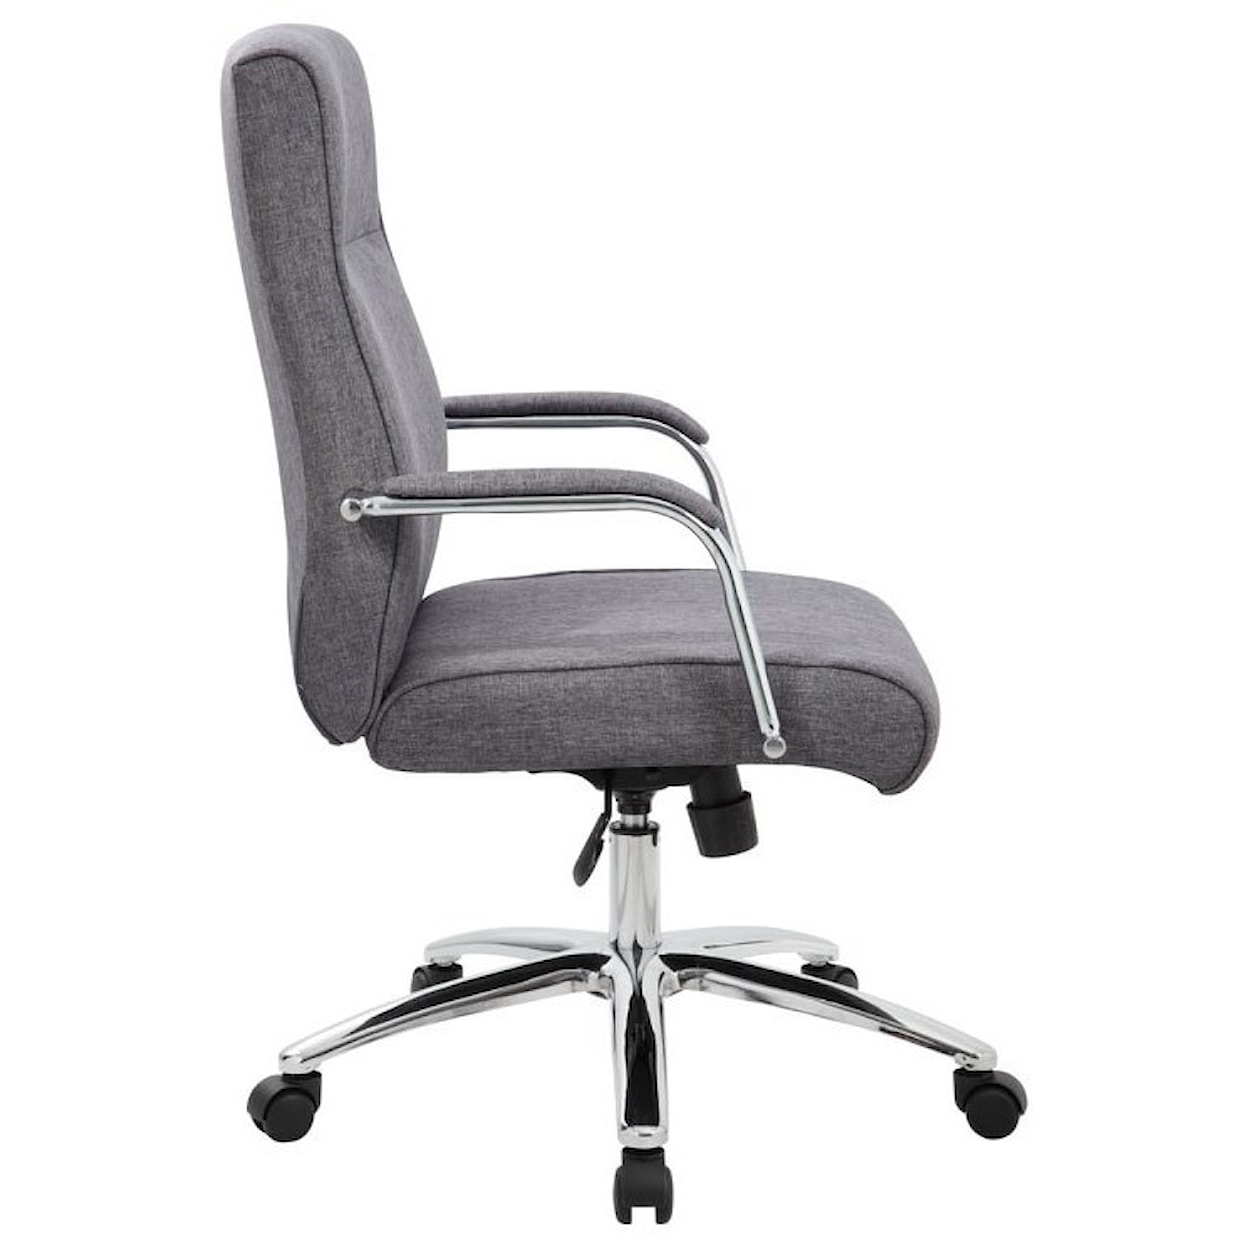 Presidential Seating Executive Chairs Home Office Chair